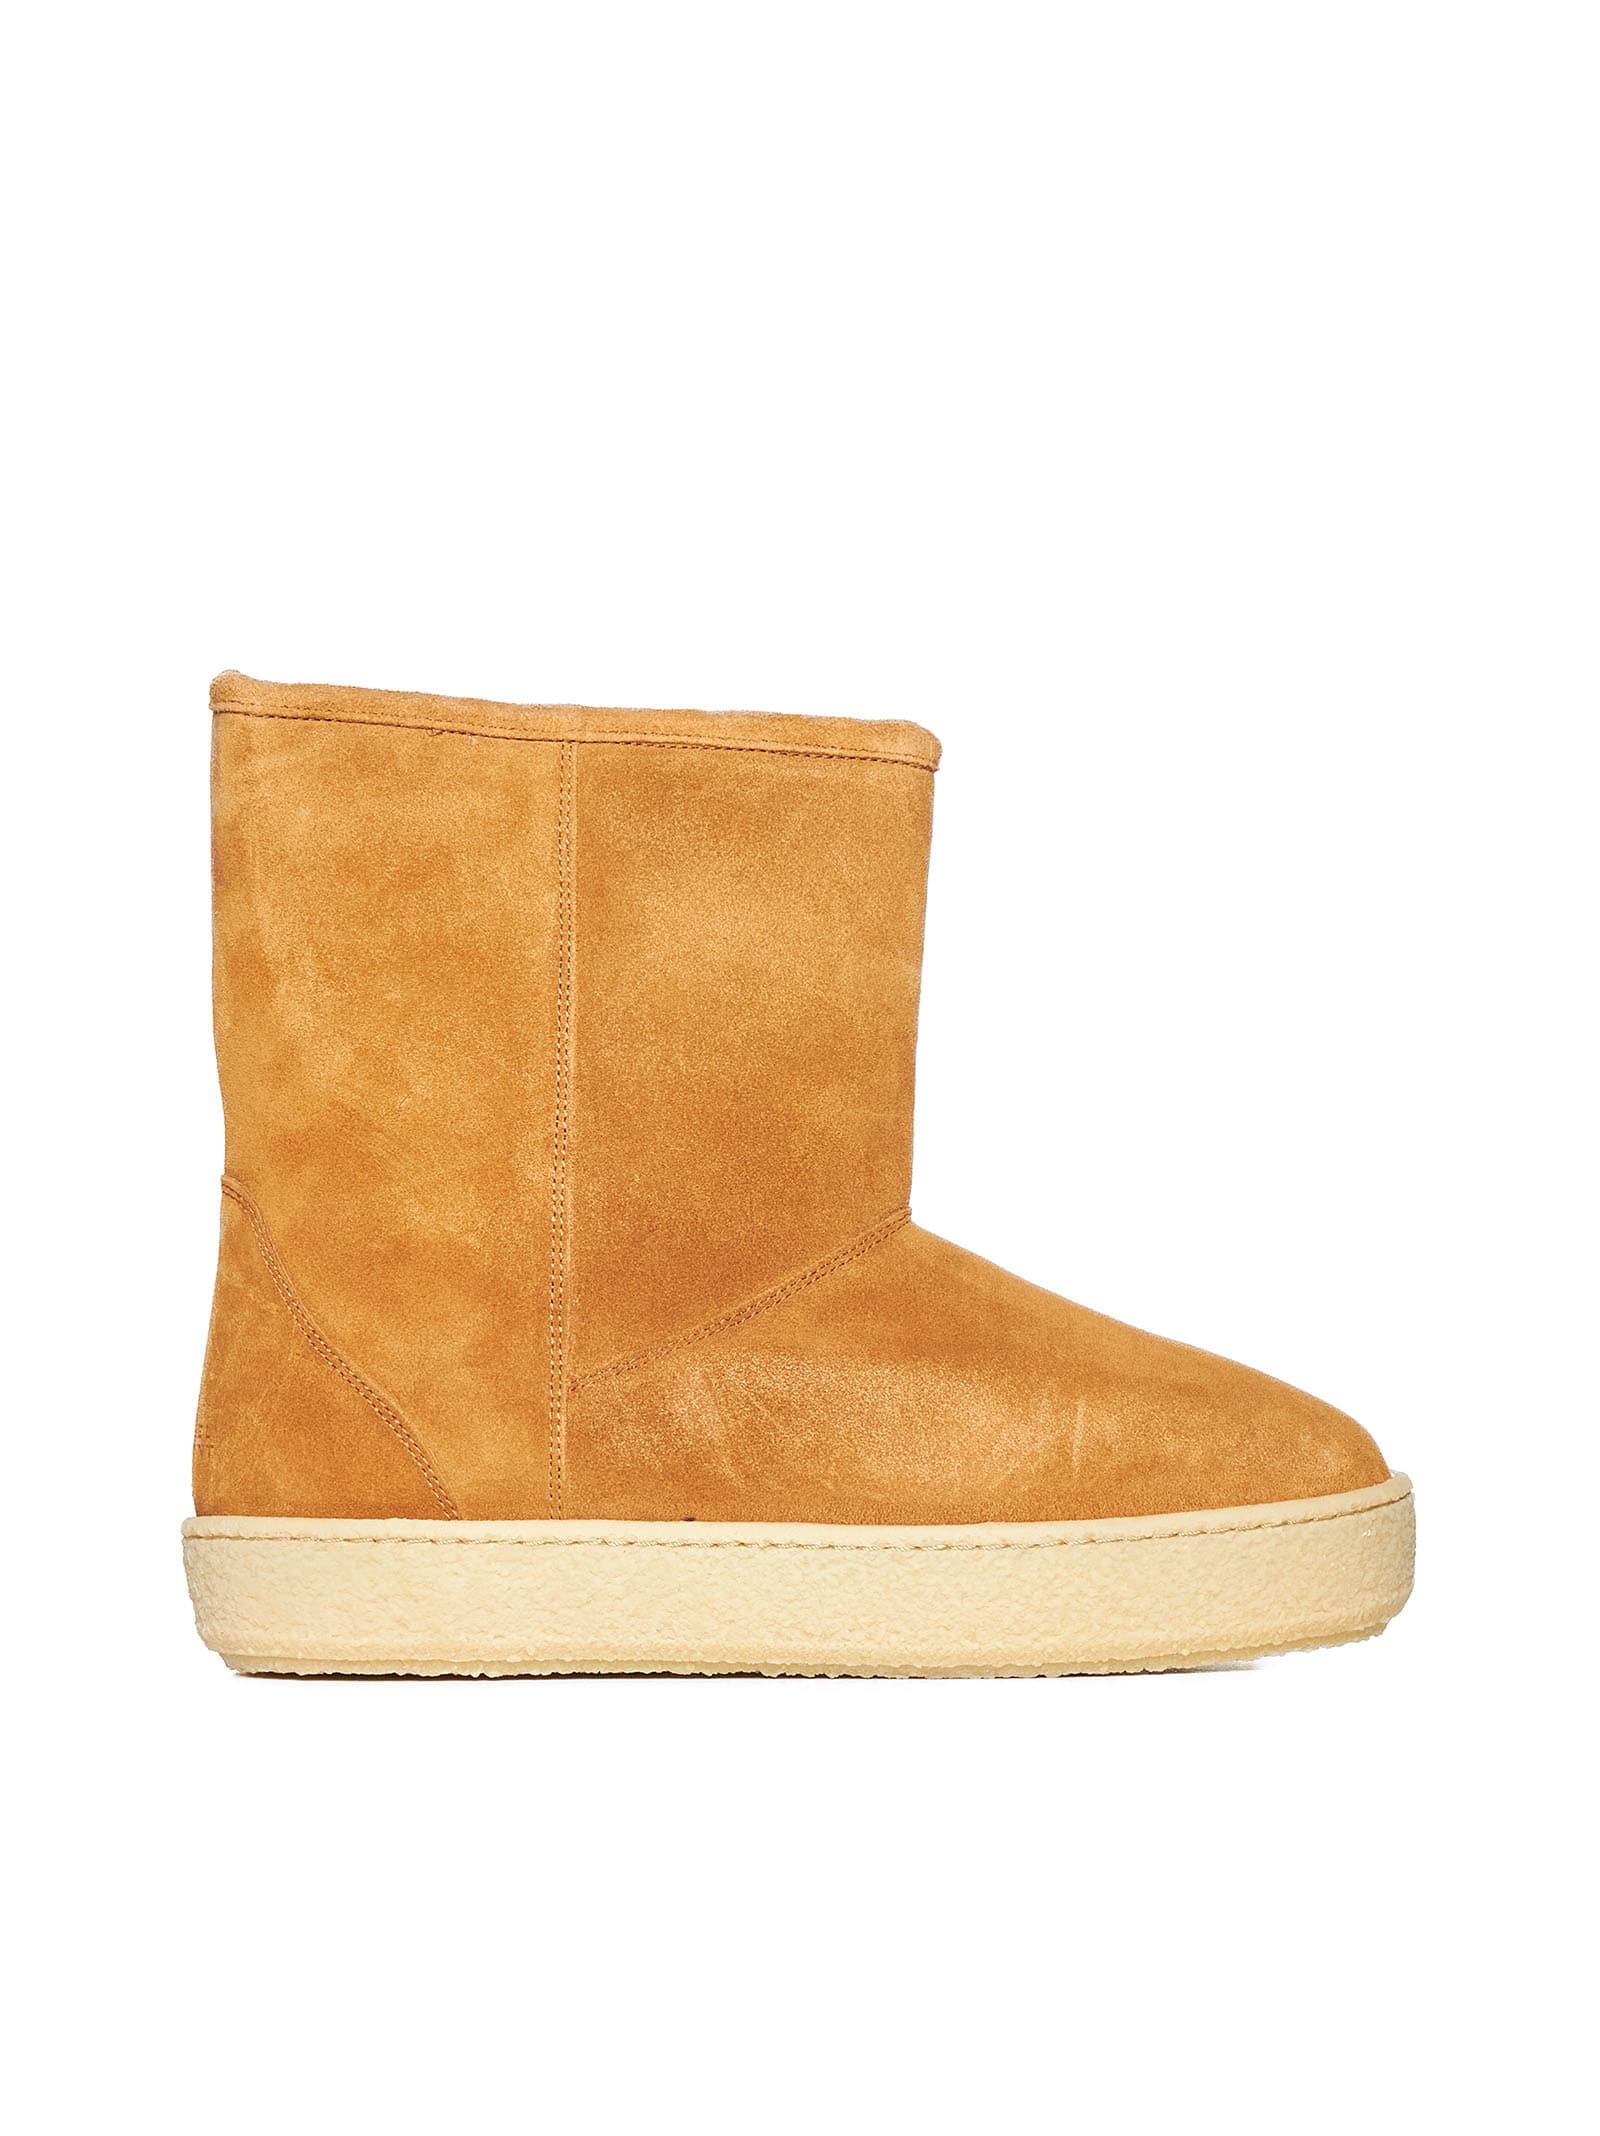 Isabel Marant Boots In Camel